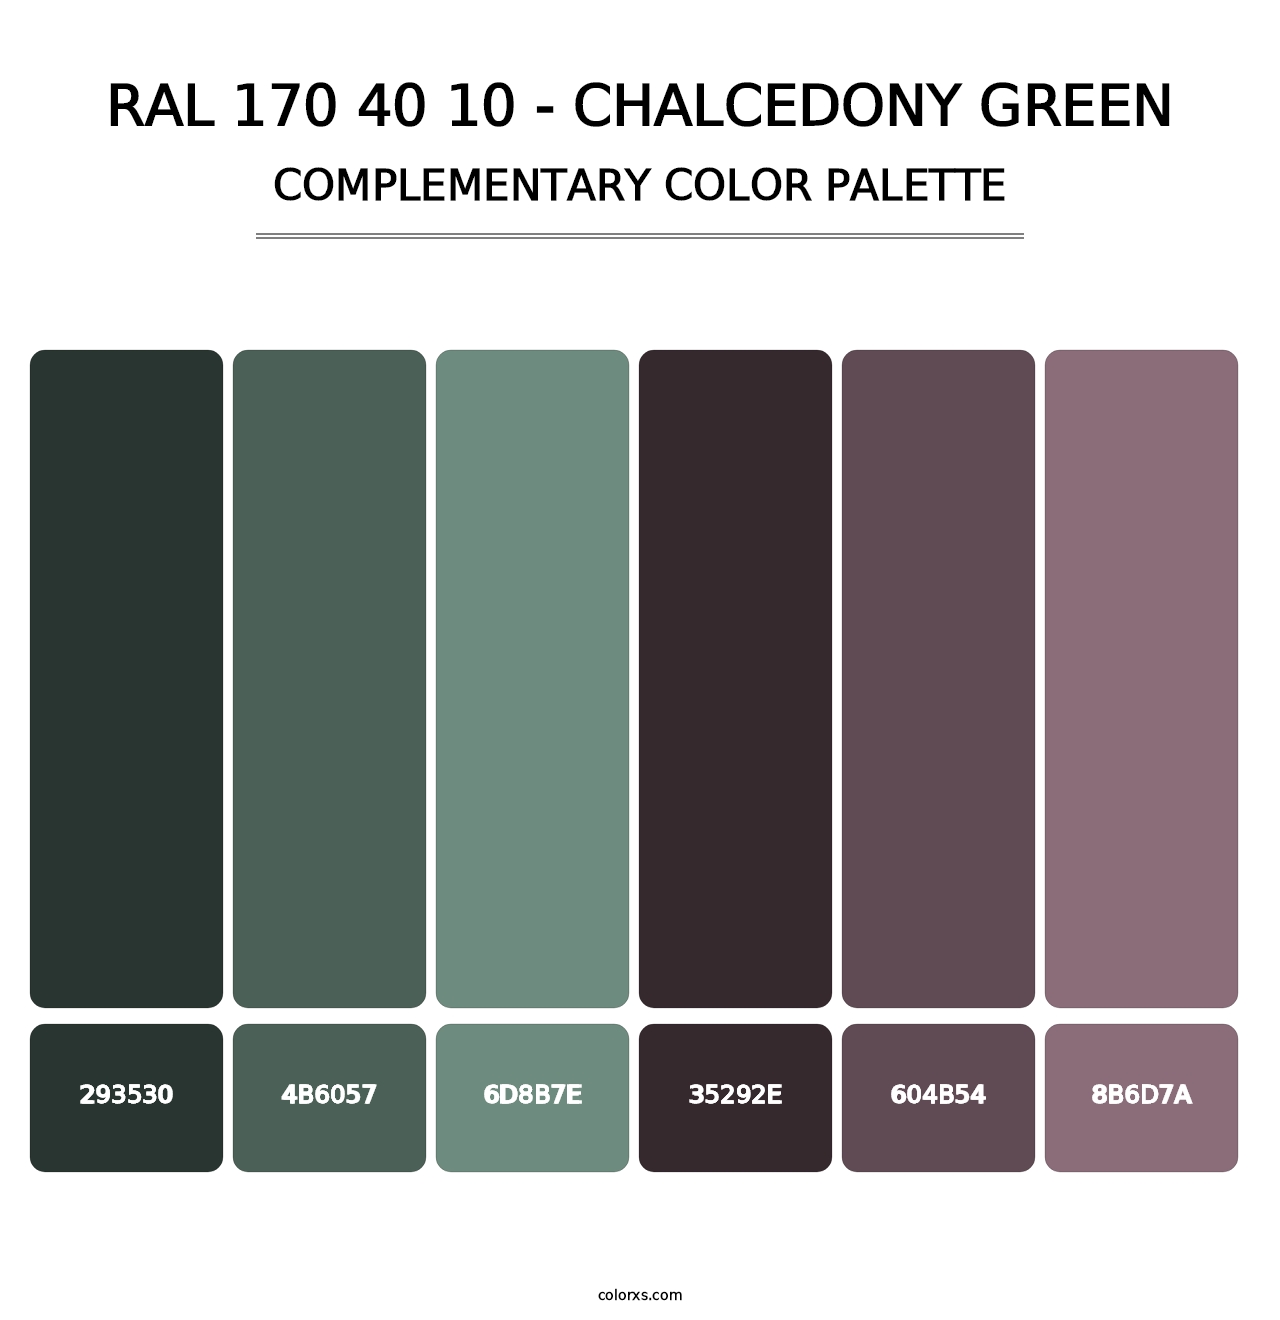 RAL 170 40 10 - Chalcedony Green - Complementary Color Palette